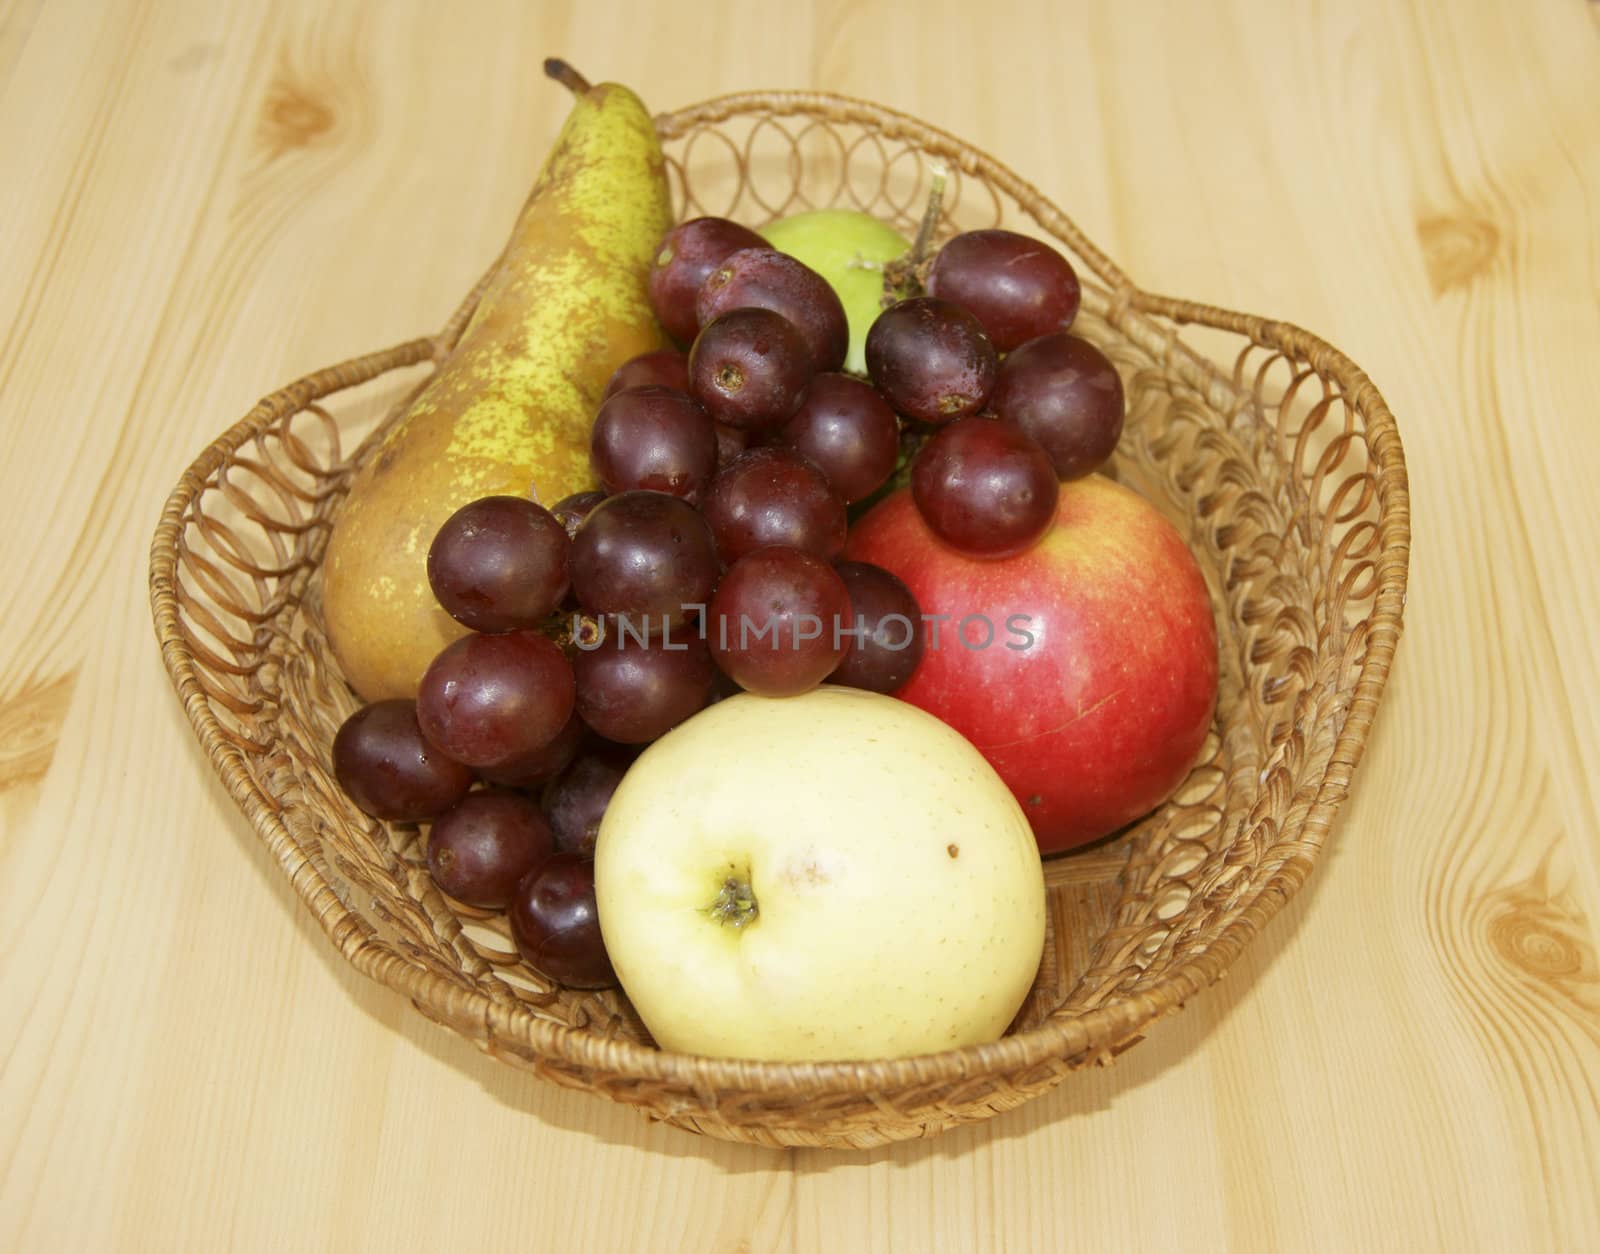 Fruits on table in basket by cobol1964